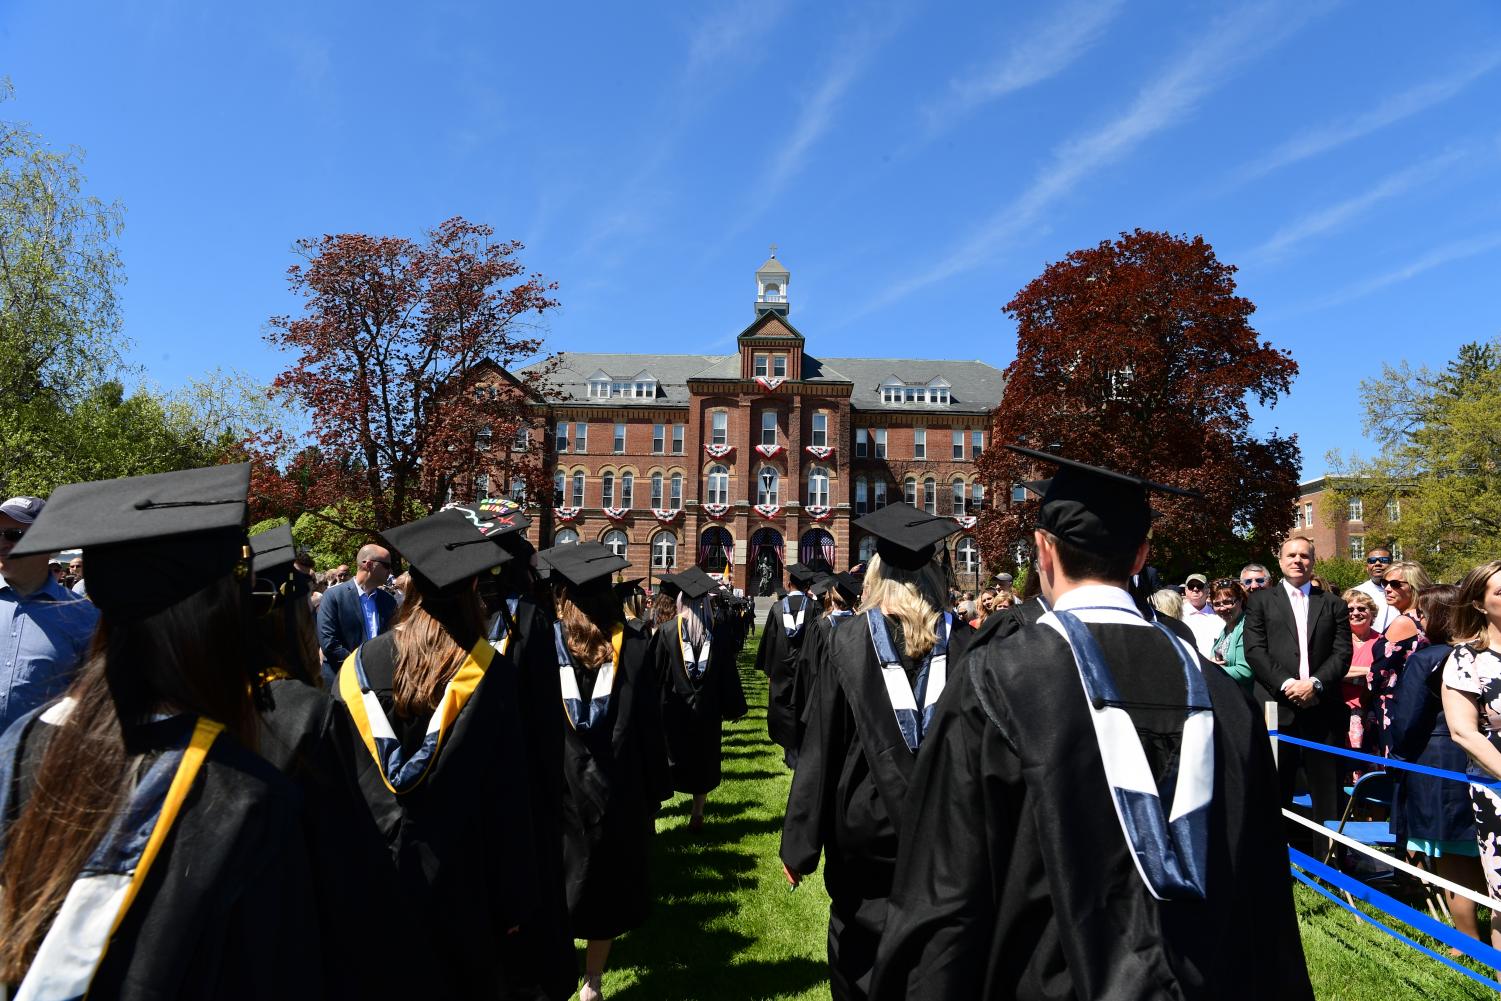 Saint Anselm College updates Commencement plan for Class of 2021 The